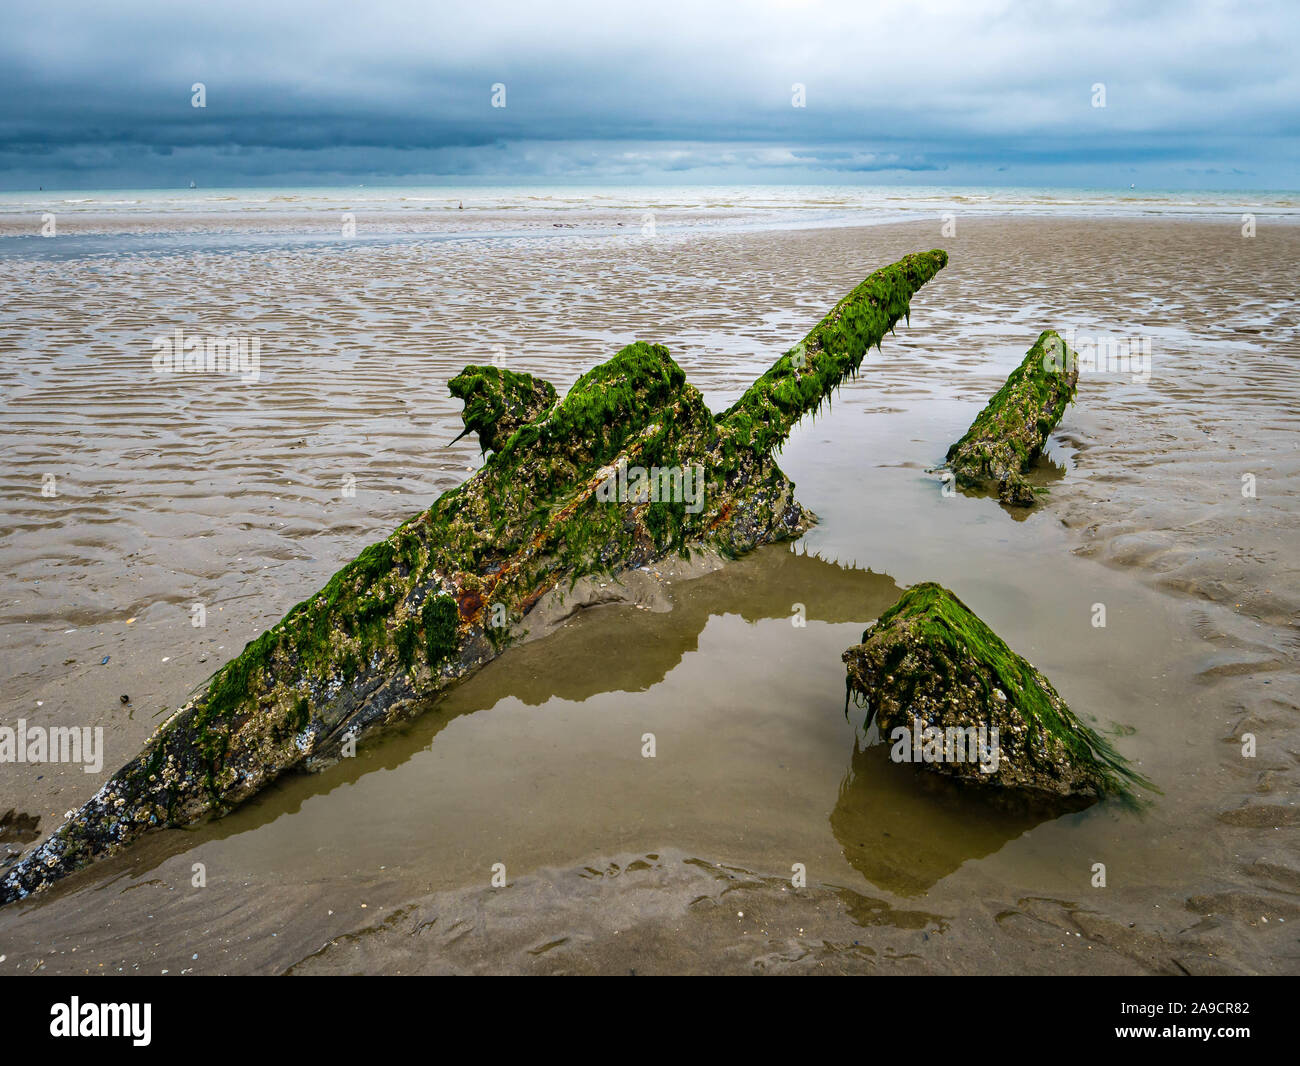 Sword like leftovers from a World War ship at a beach in northern France Stock Photo